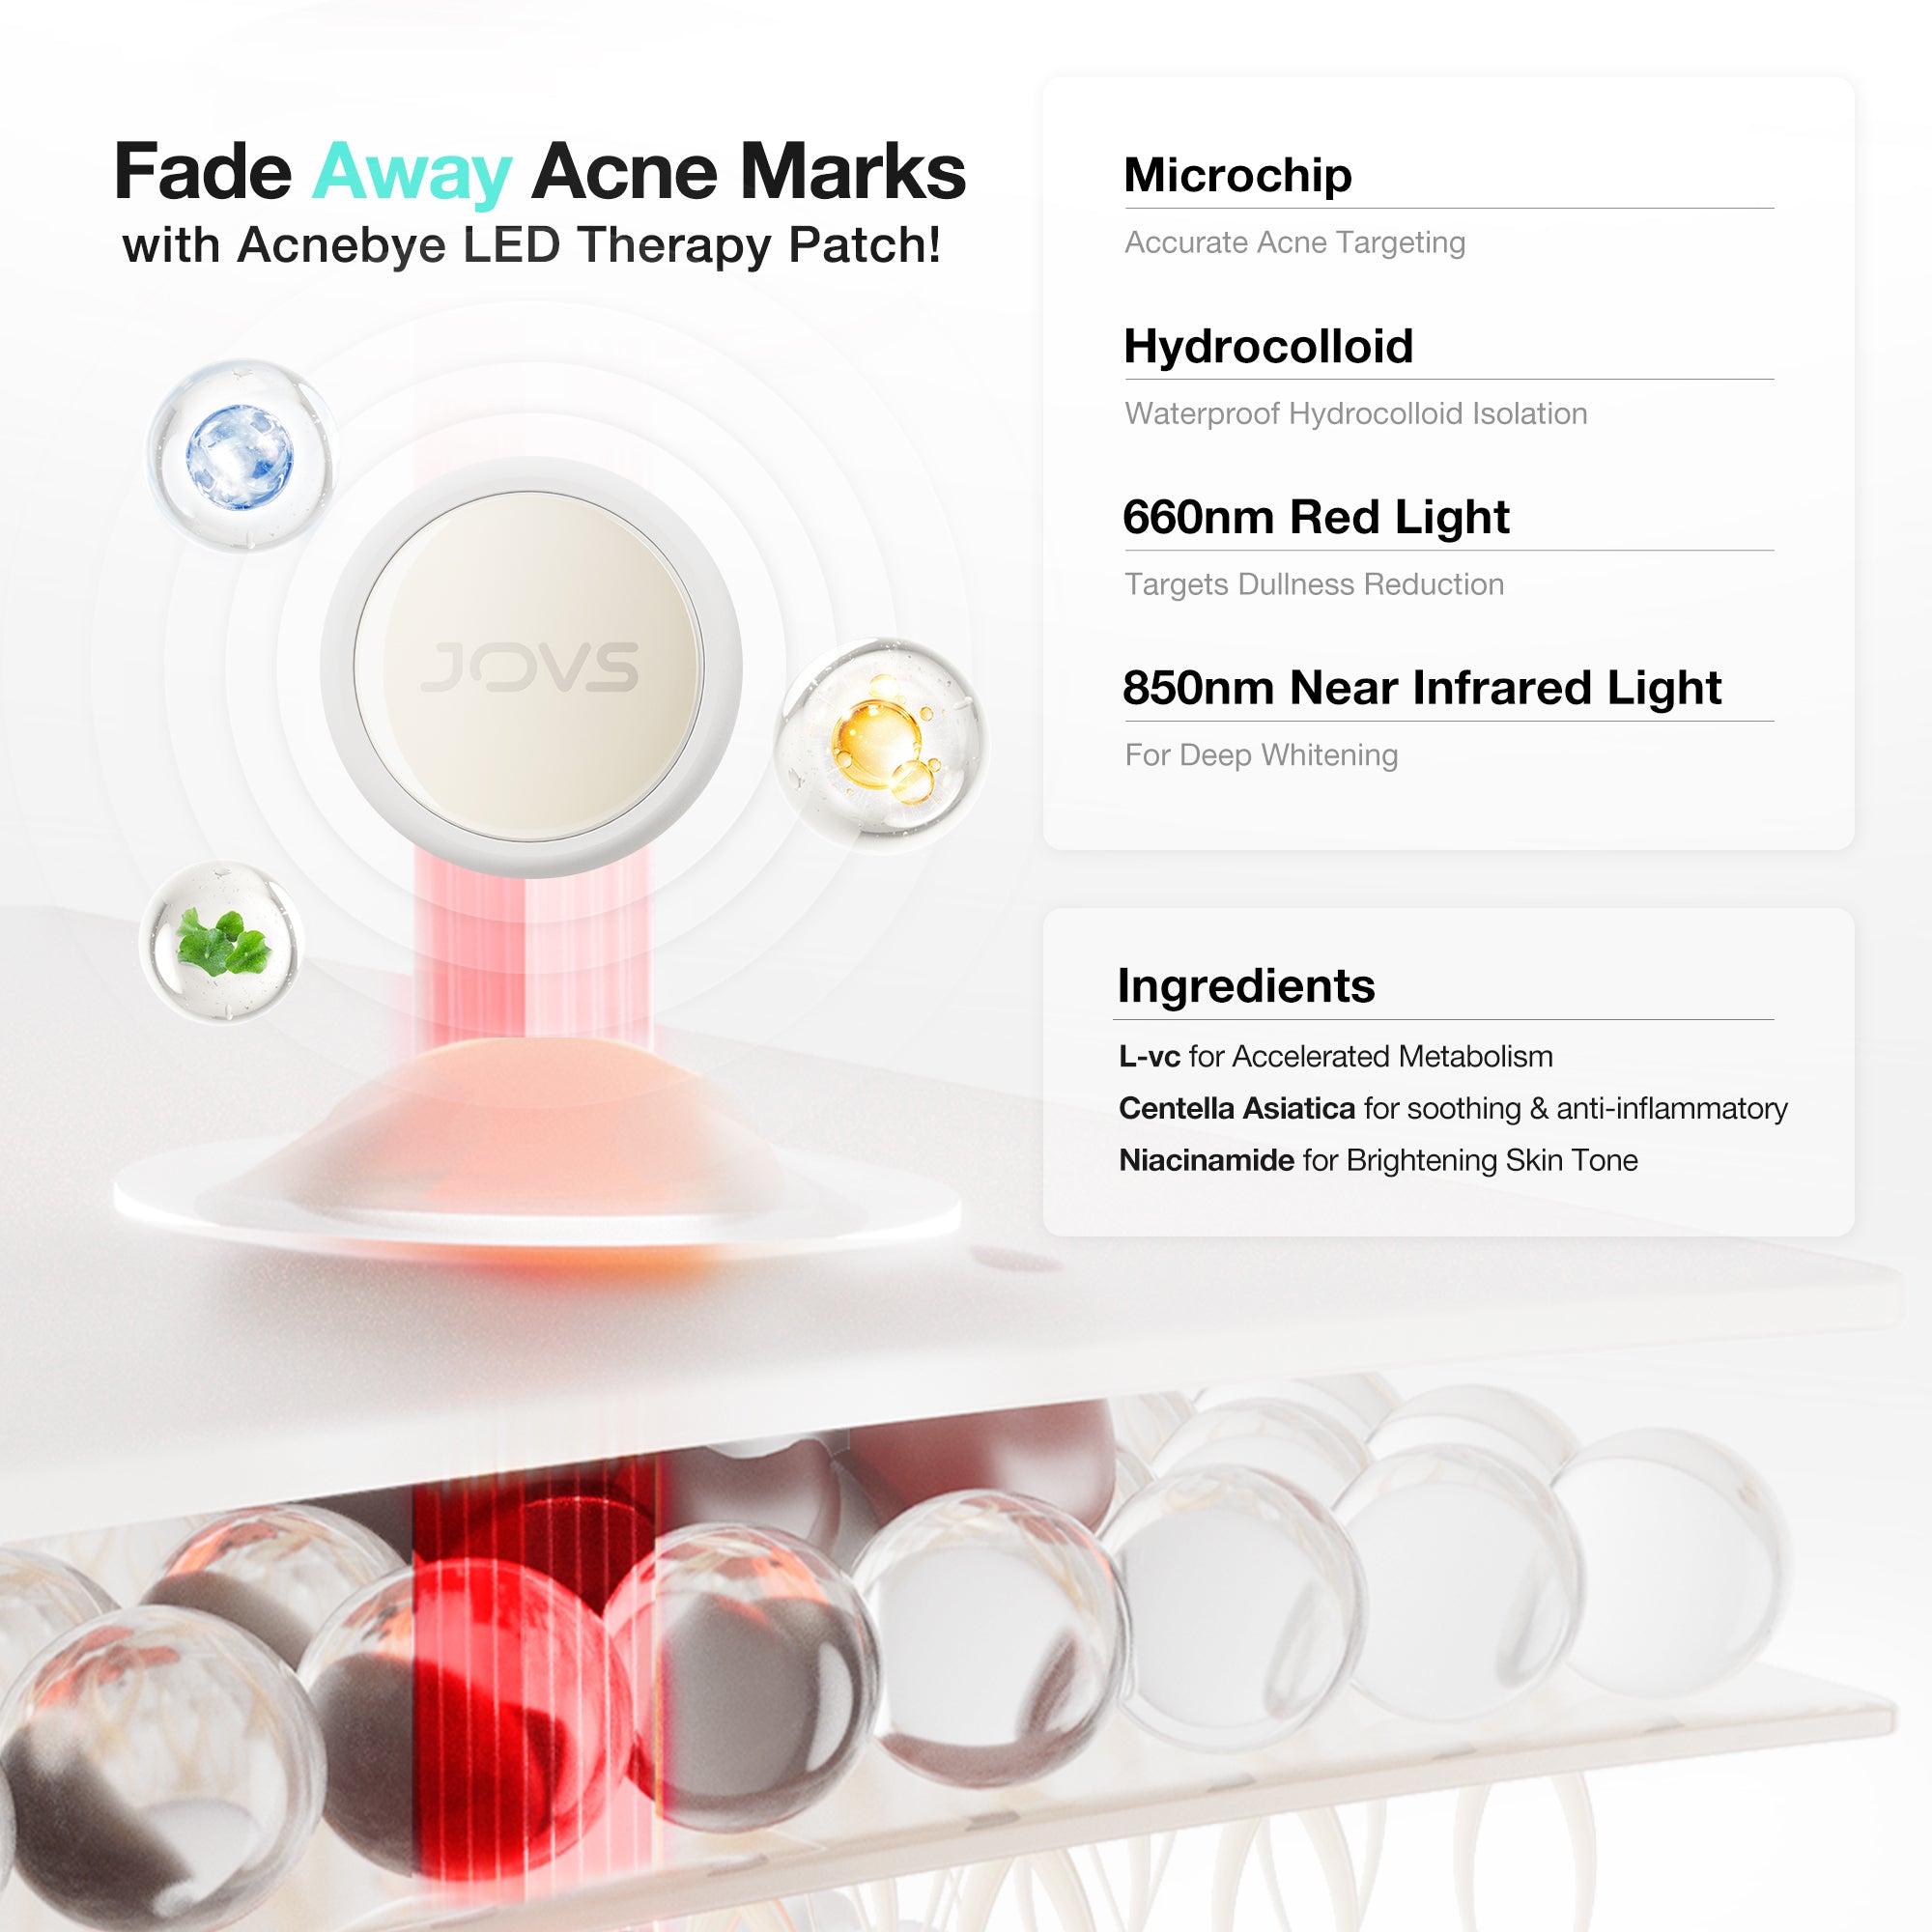 Explore JOVS Acnebye LED Therapy Patch for fading acne marks with light therapy technology for deep skin care.